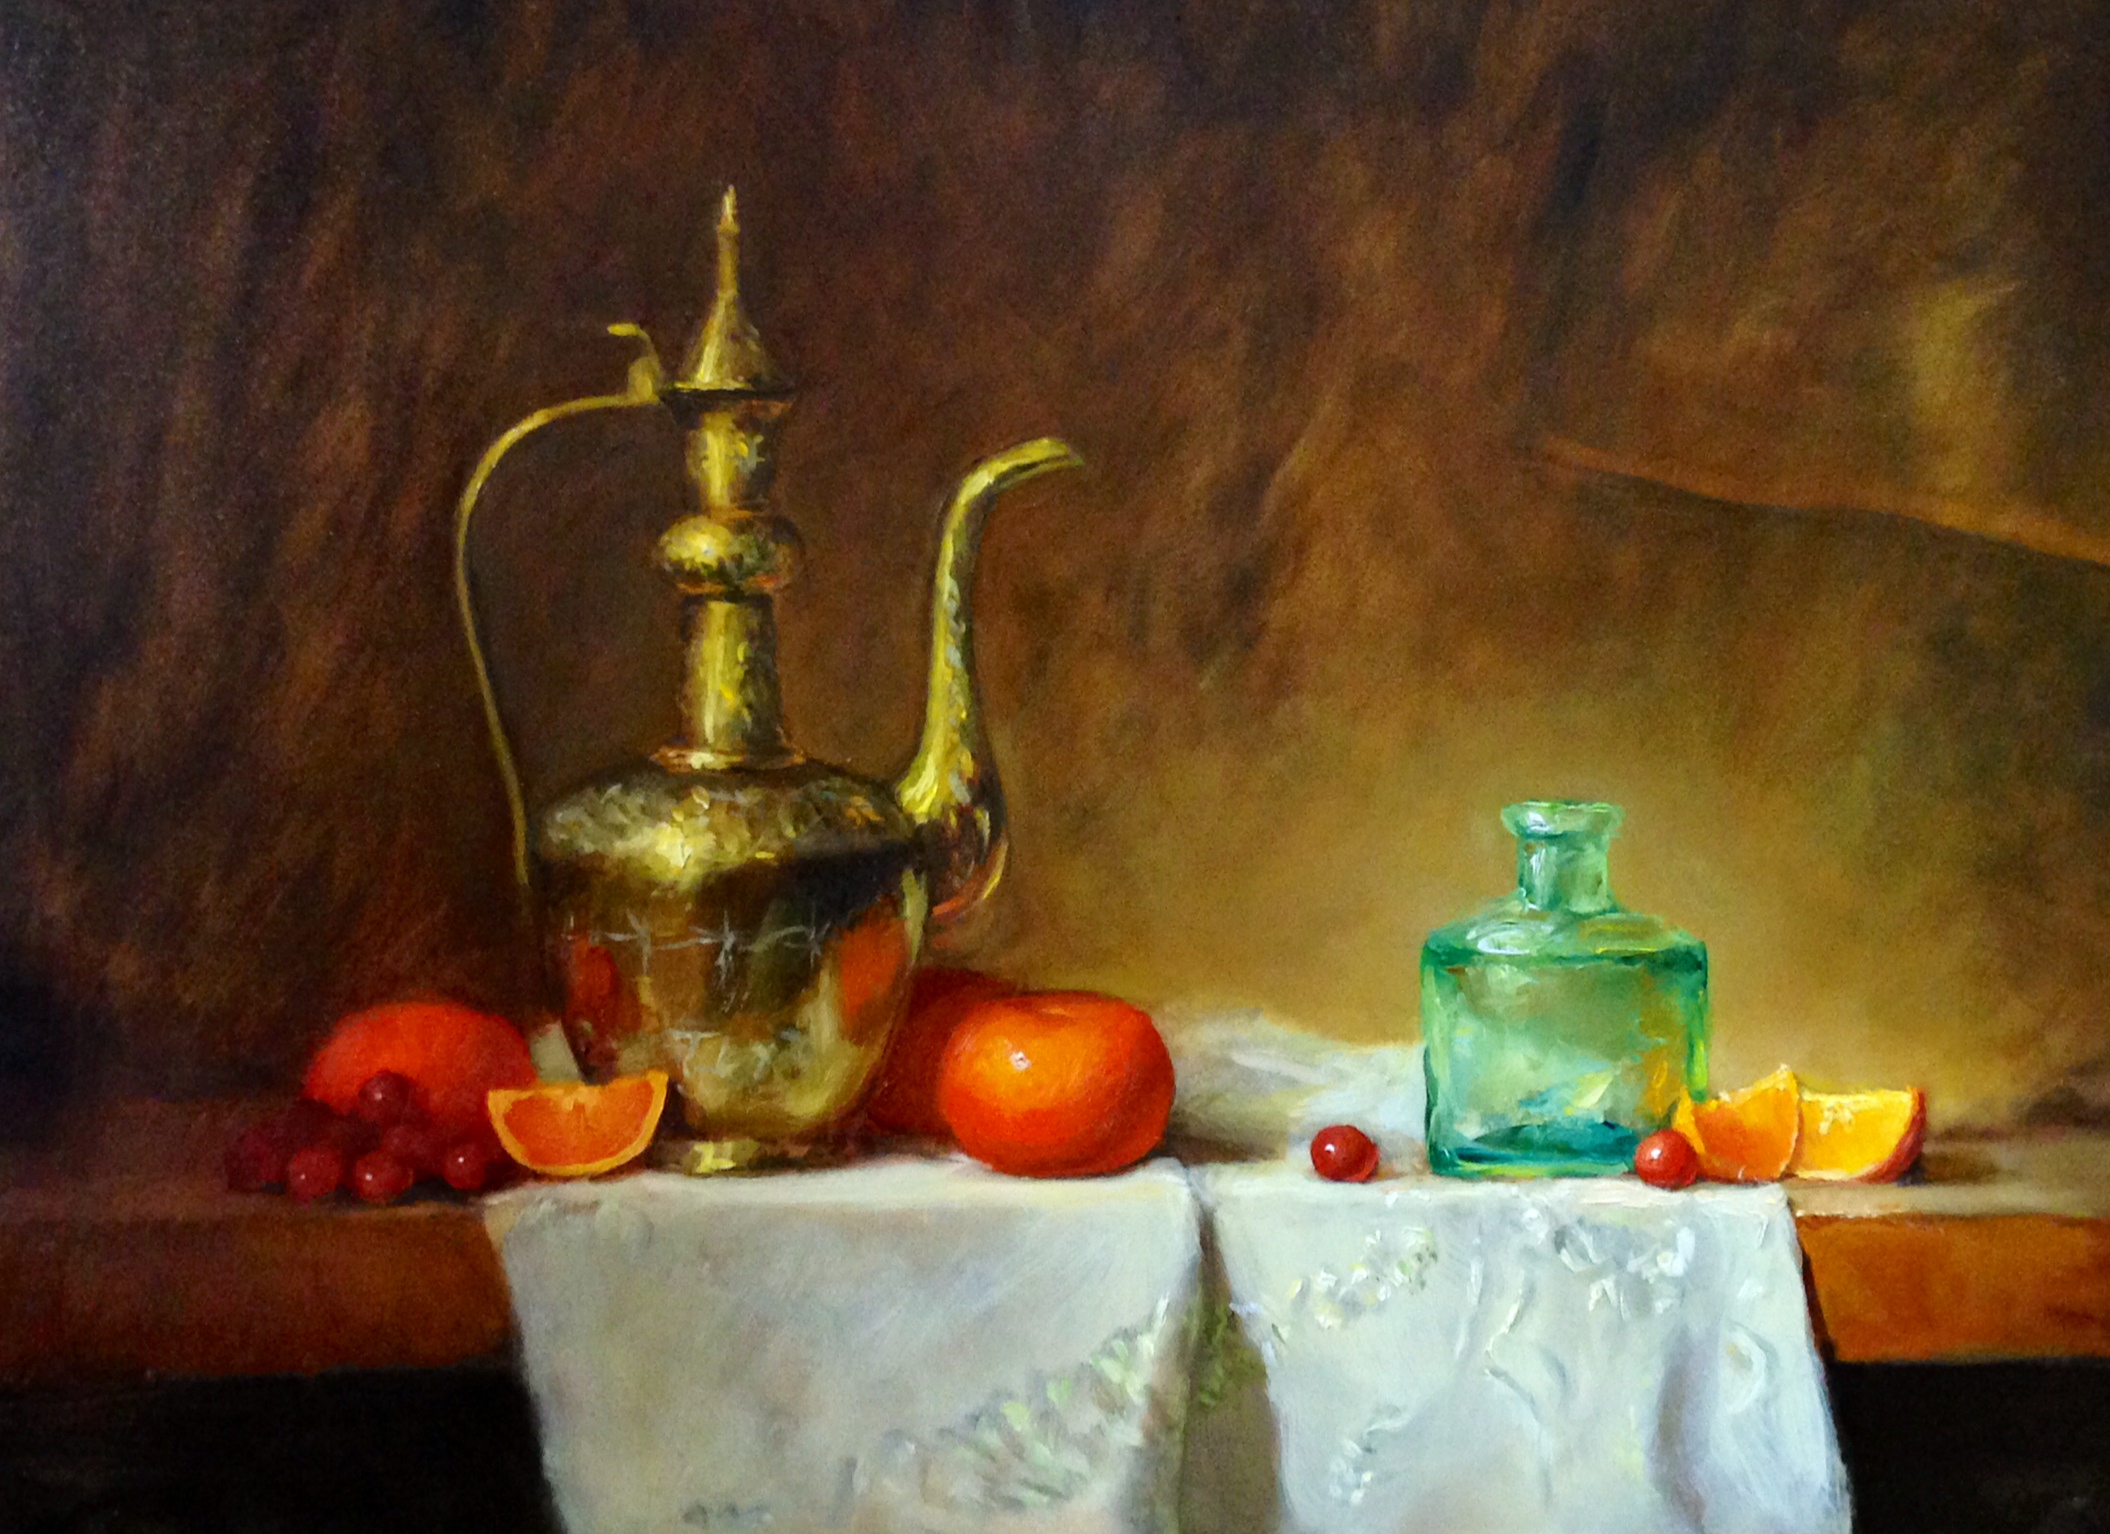 Pitcher and Mandarins 12x16 Oil on board